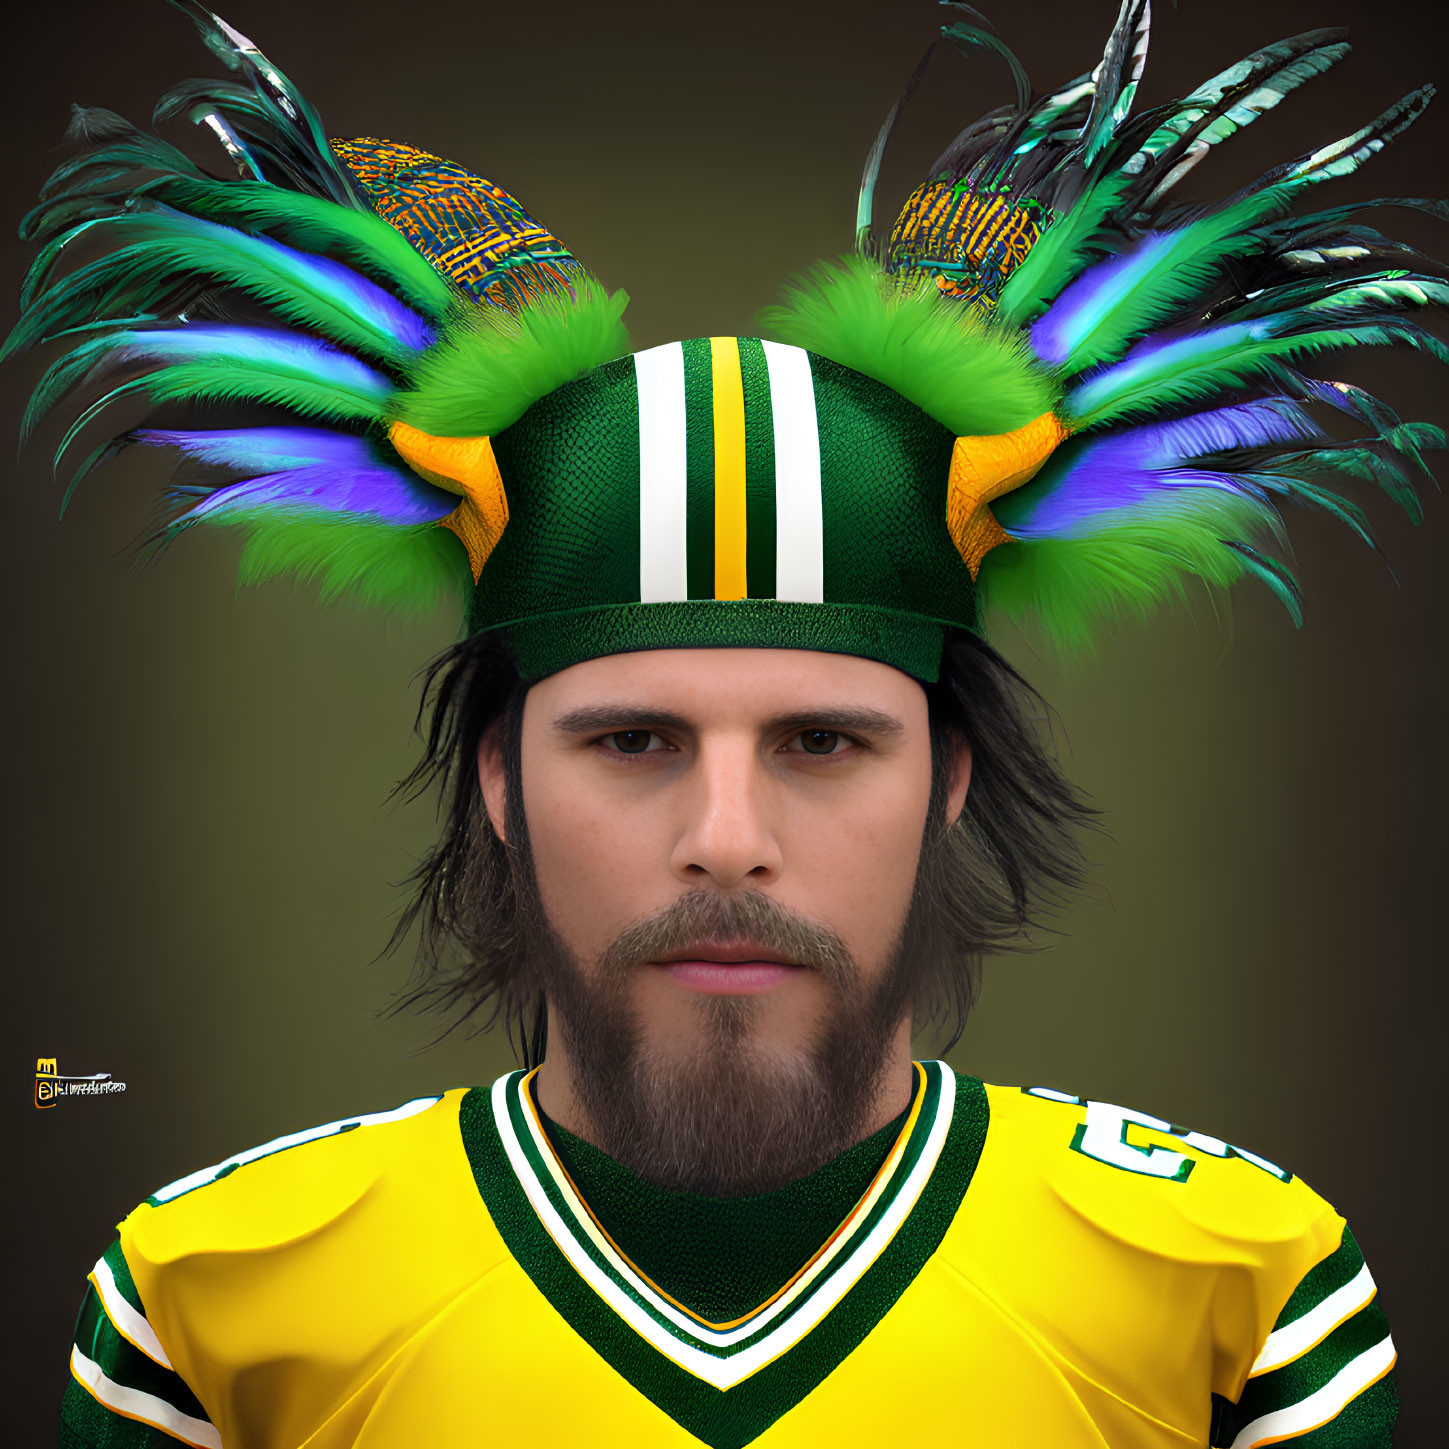 Man in Stern Expression Wearing Colorful Sports Jersey and Feathered Headpiece